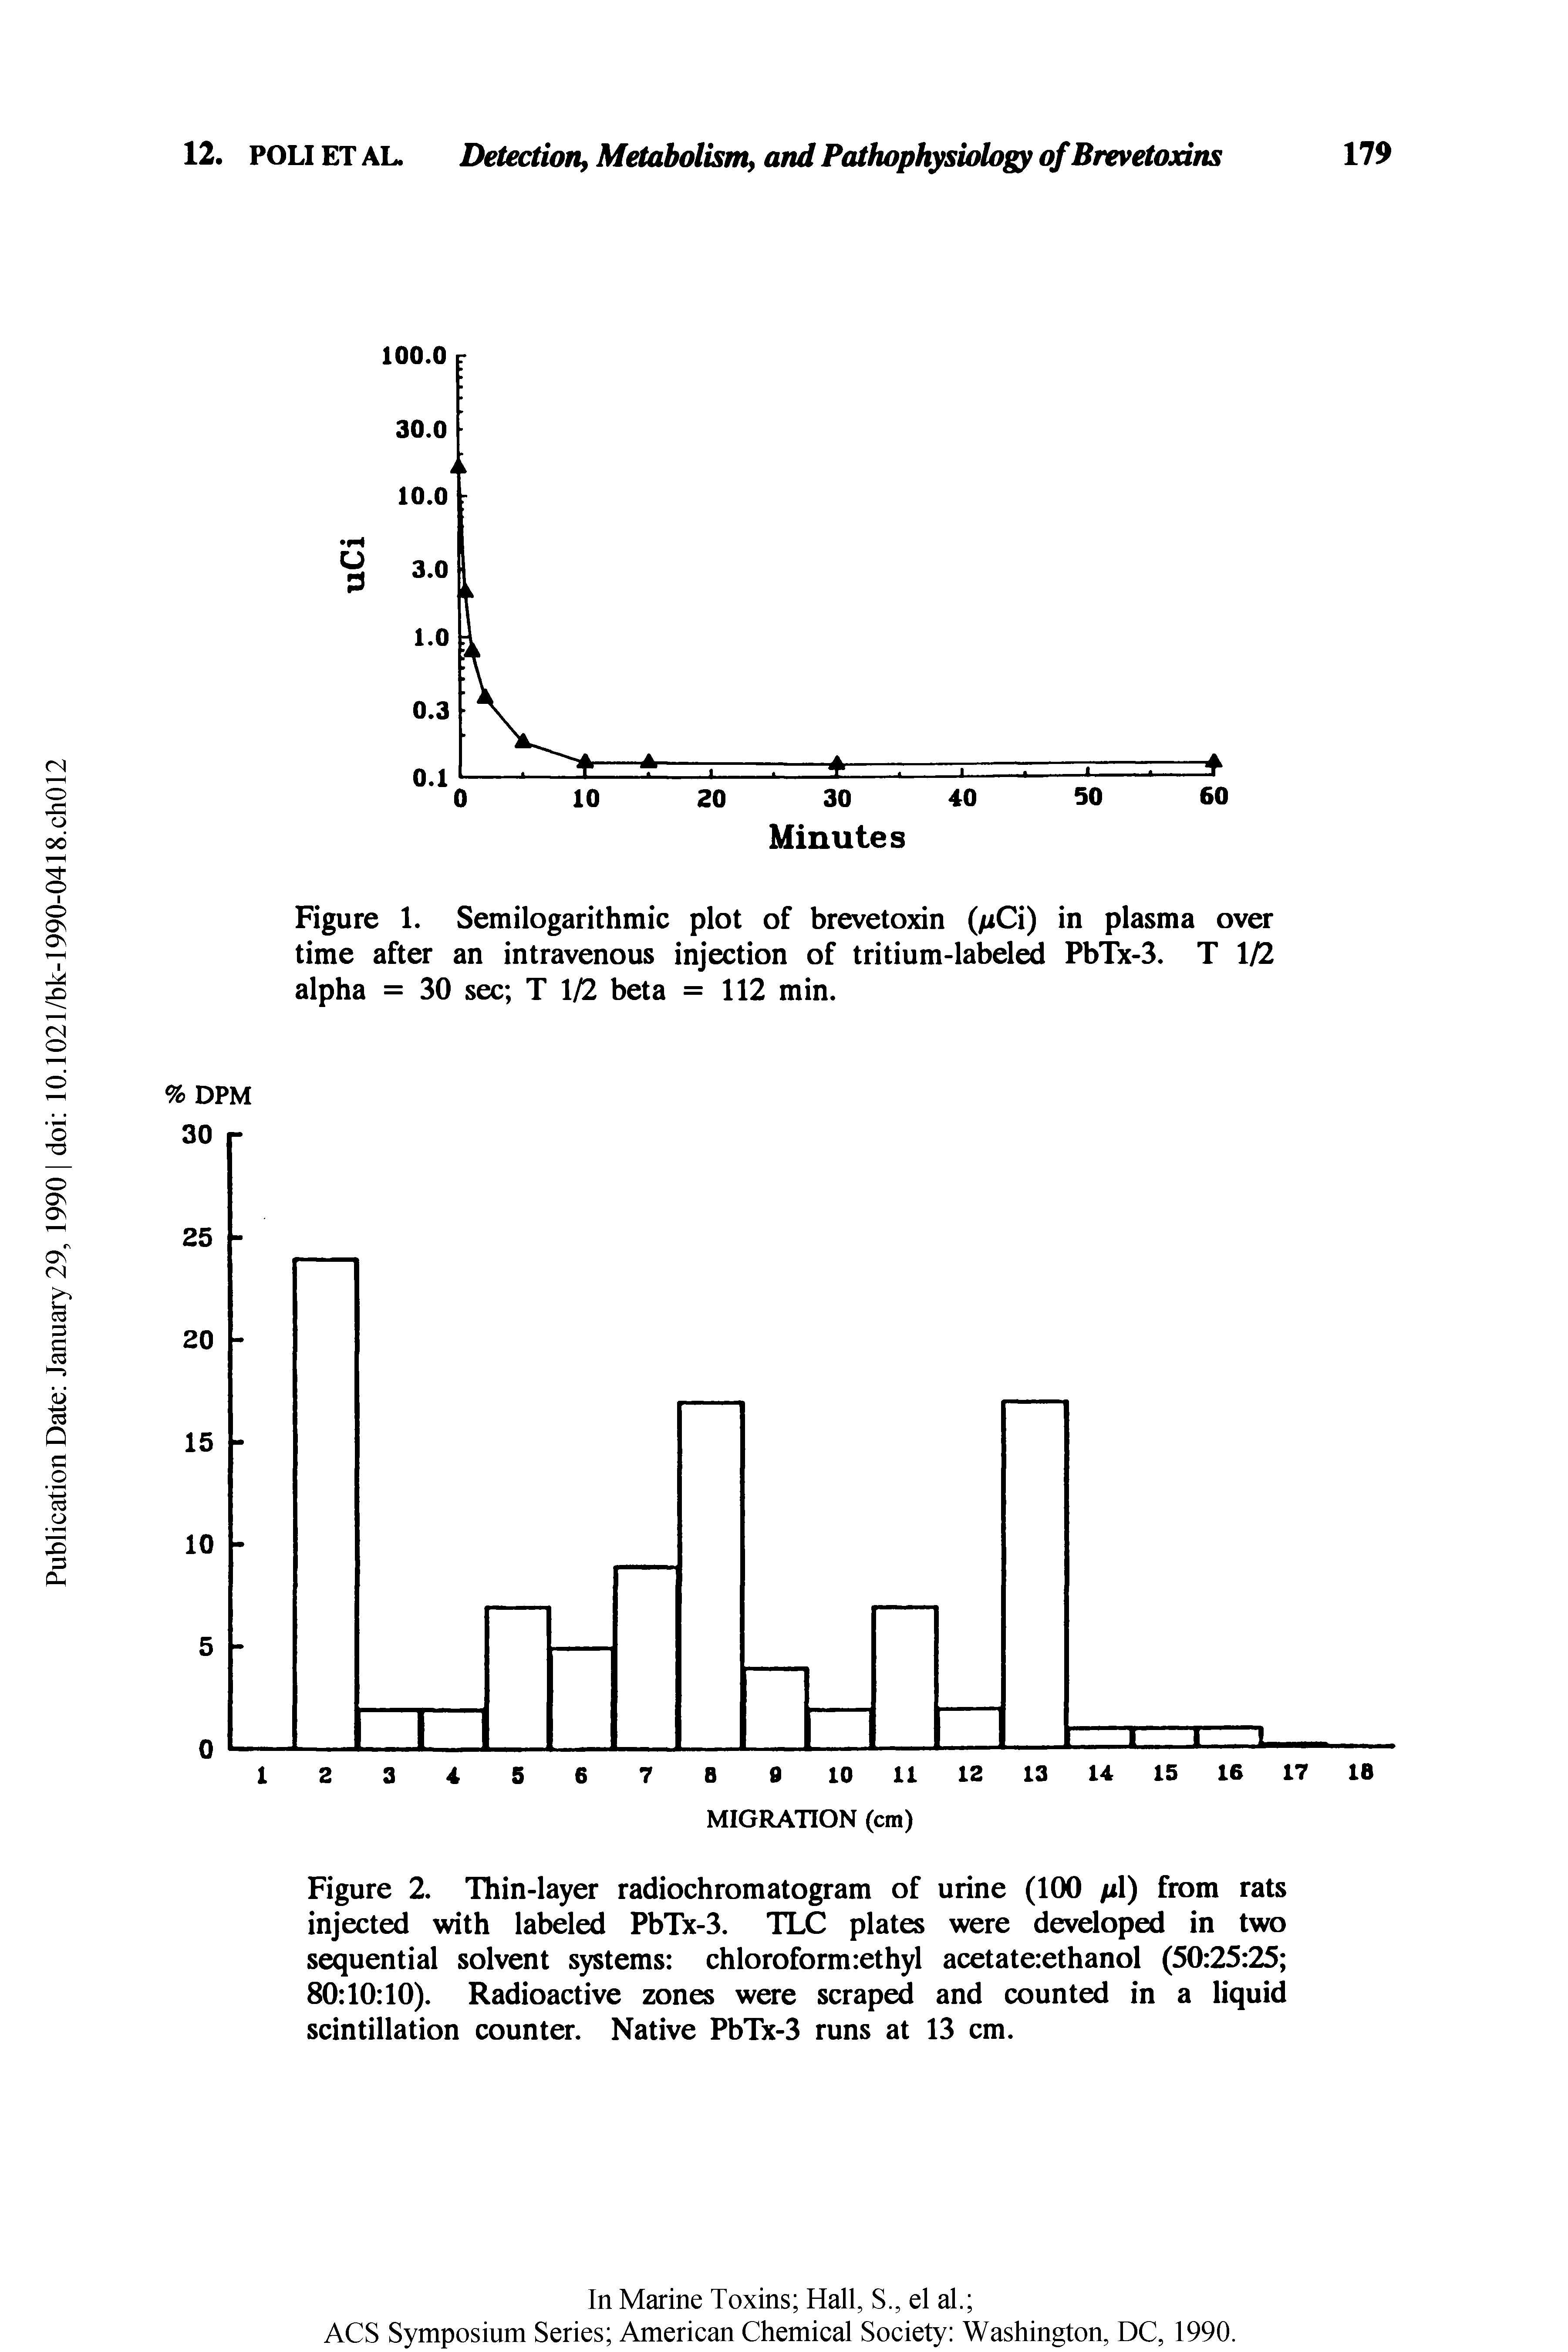 Figure 1. Semilogarithmic plot of brevetoxin ( iCi) in plasma over time after an intravenous injection of tritium-labeled PbTx-3. T 1/2 alpha = 30 sec T 1/2 beta = 112 min.